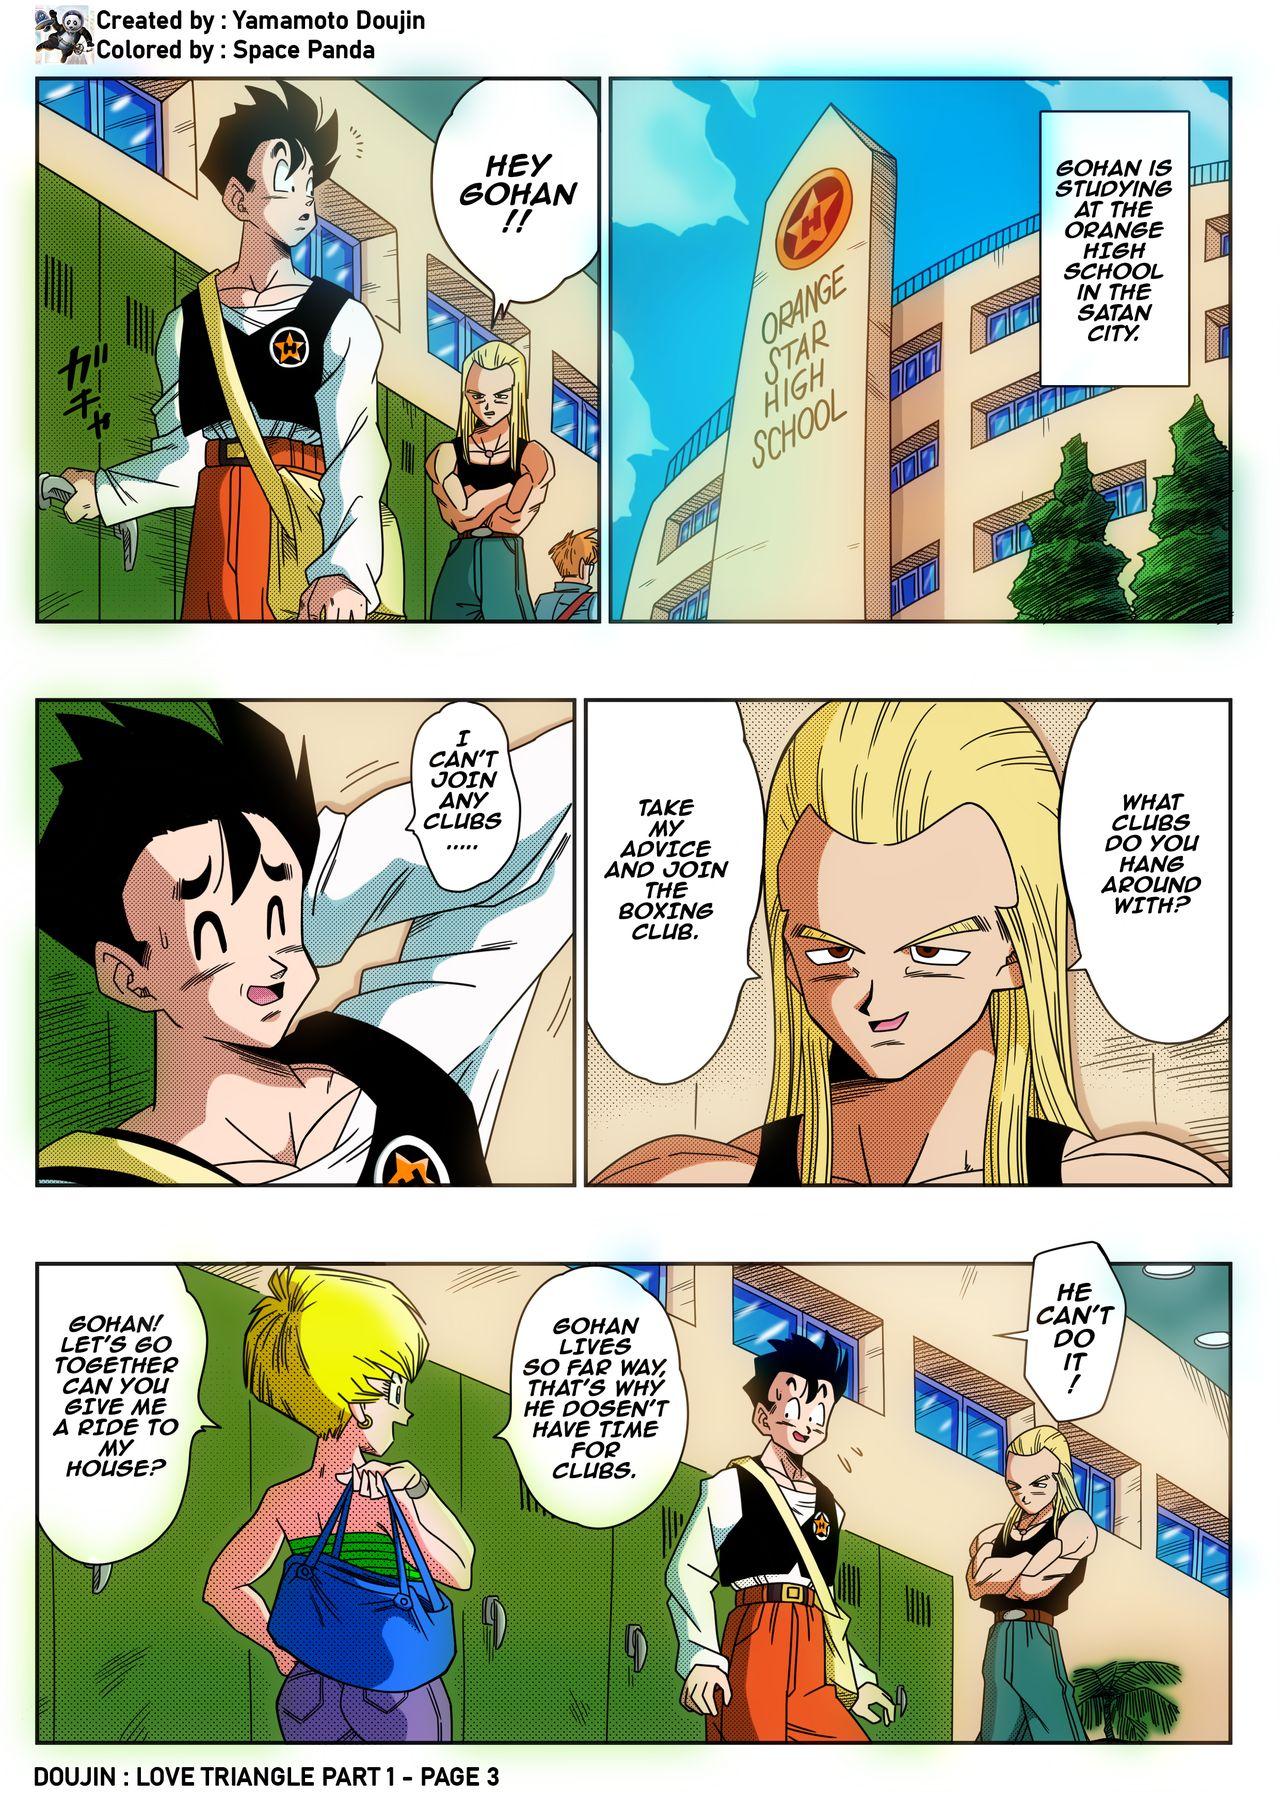 Tributo Love Triangle - Part 1 - Dragon ball z Hot Milf - Page 3